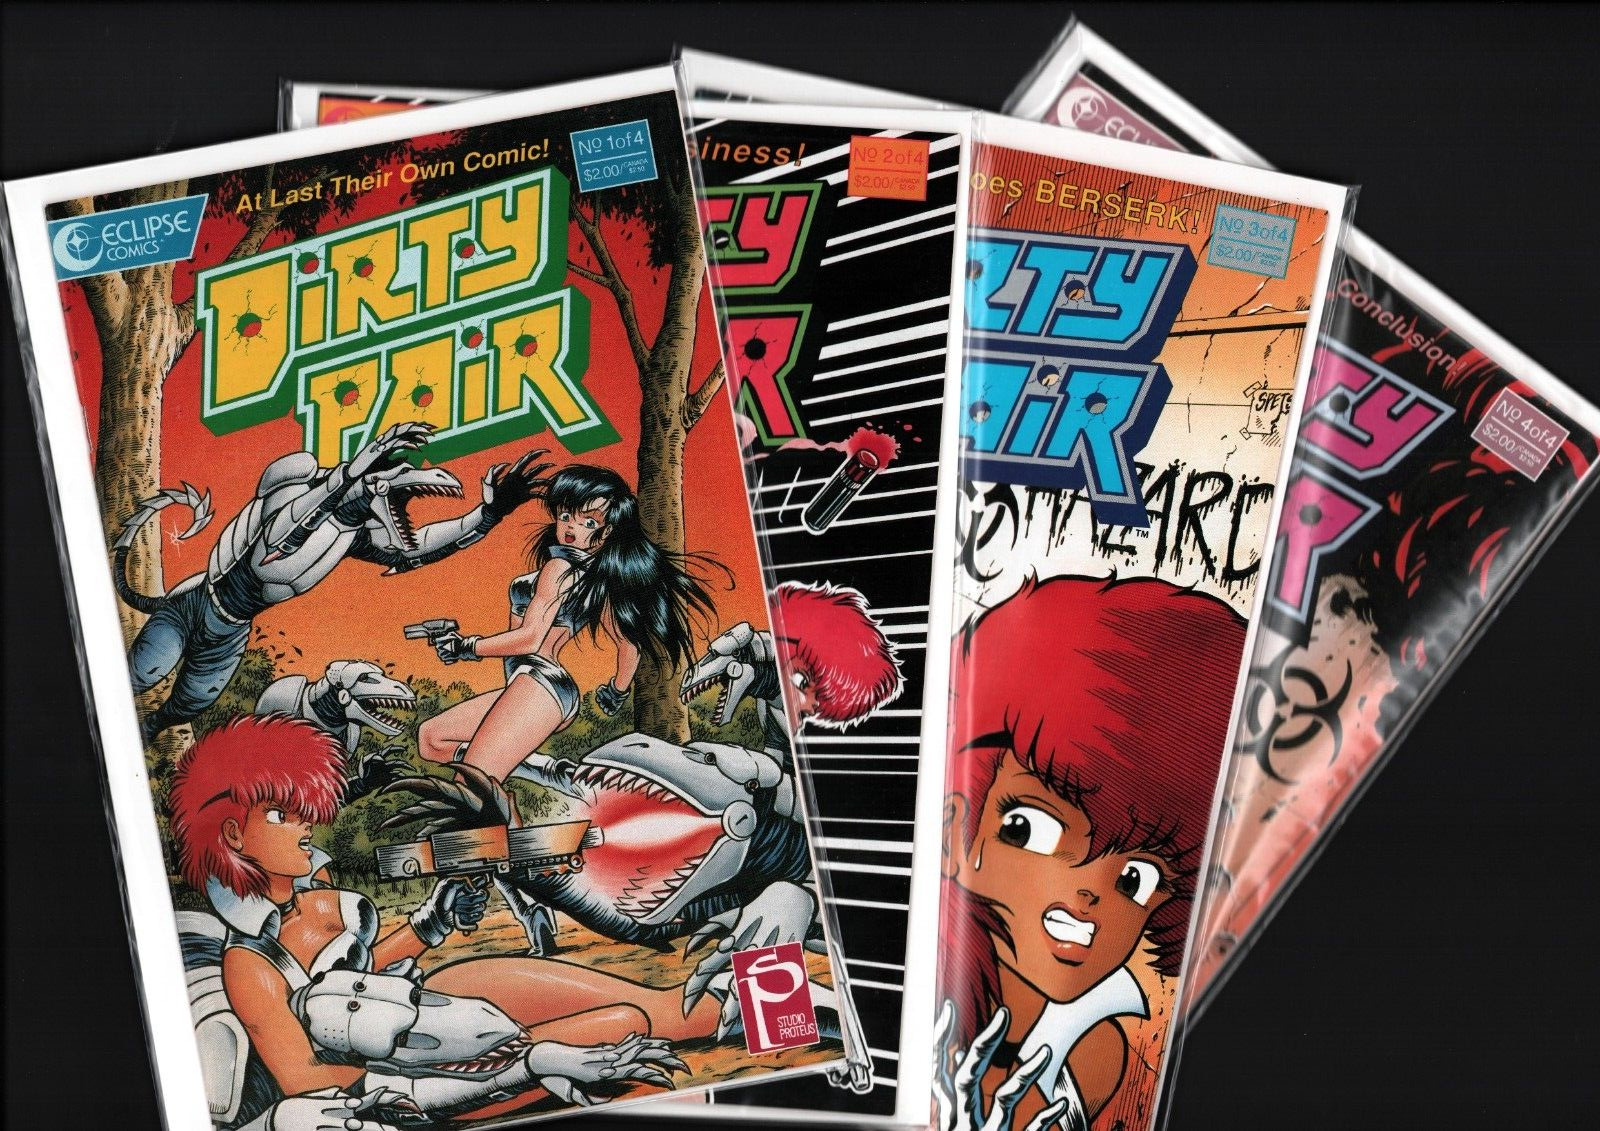 DIRTY PAIR / Complete Series 1-4 / ECLIPSE COMICS- (9.0 OB) 1988